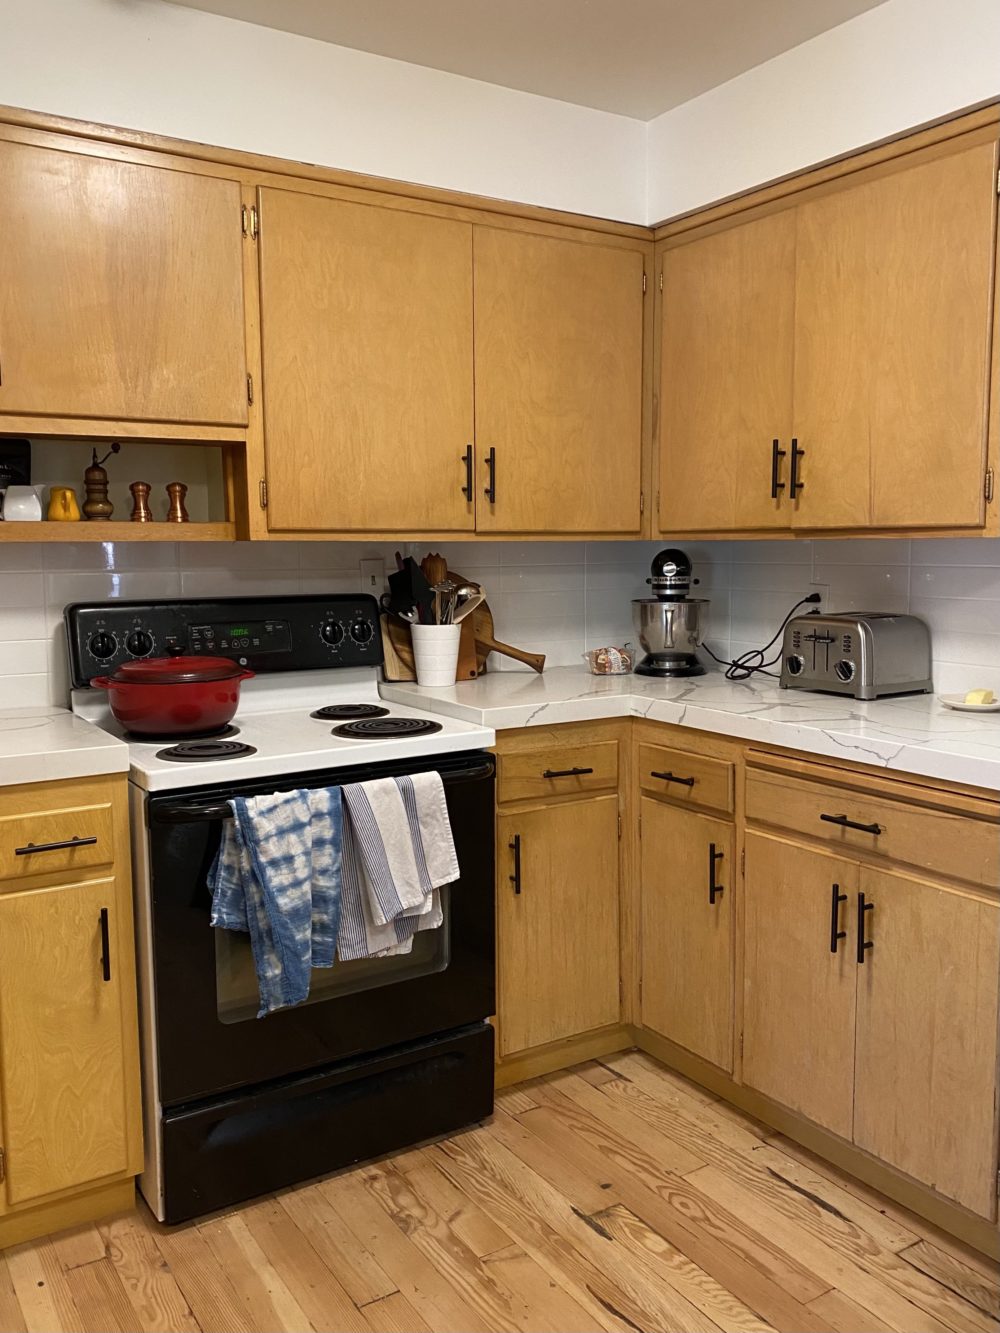 Updating Oak Kitchen Cabinets Before And After 